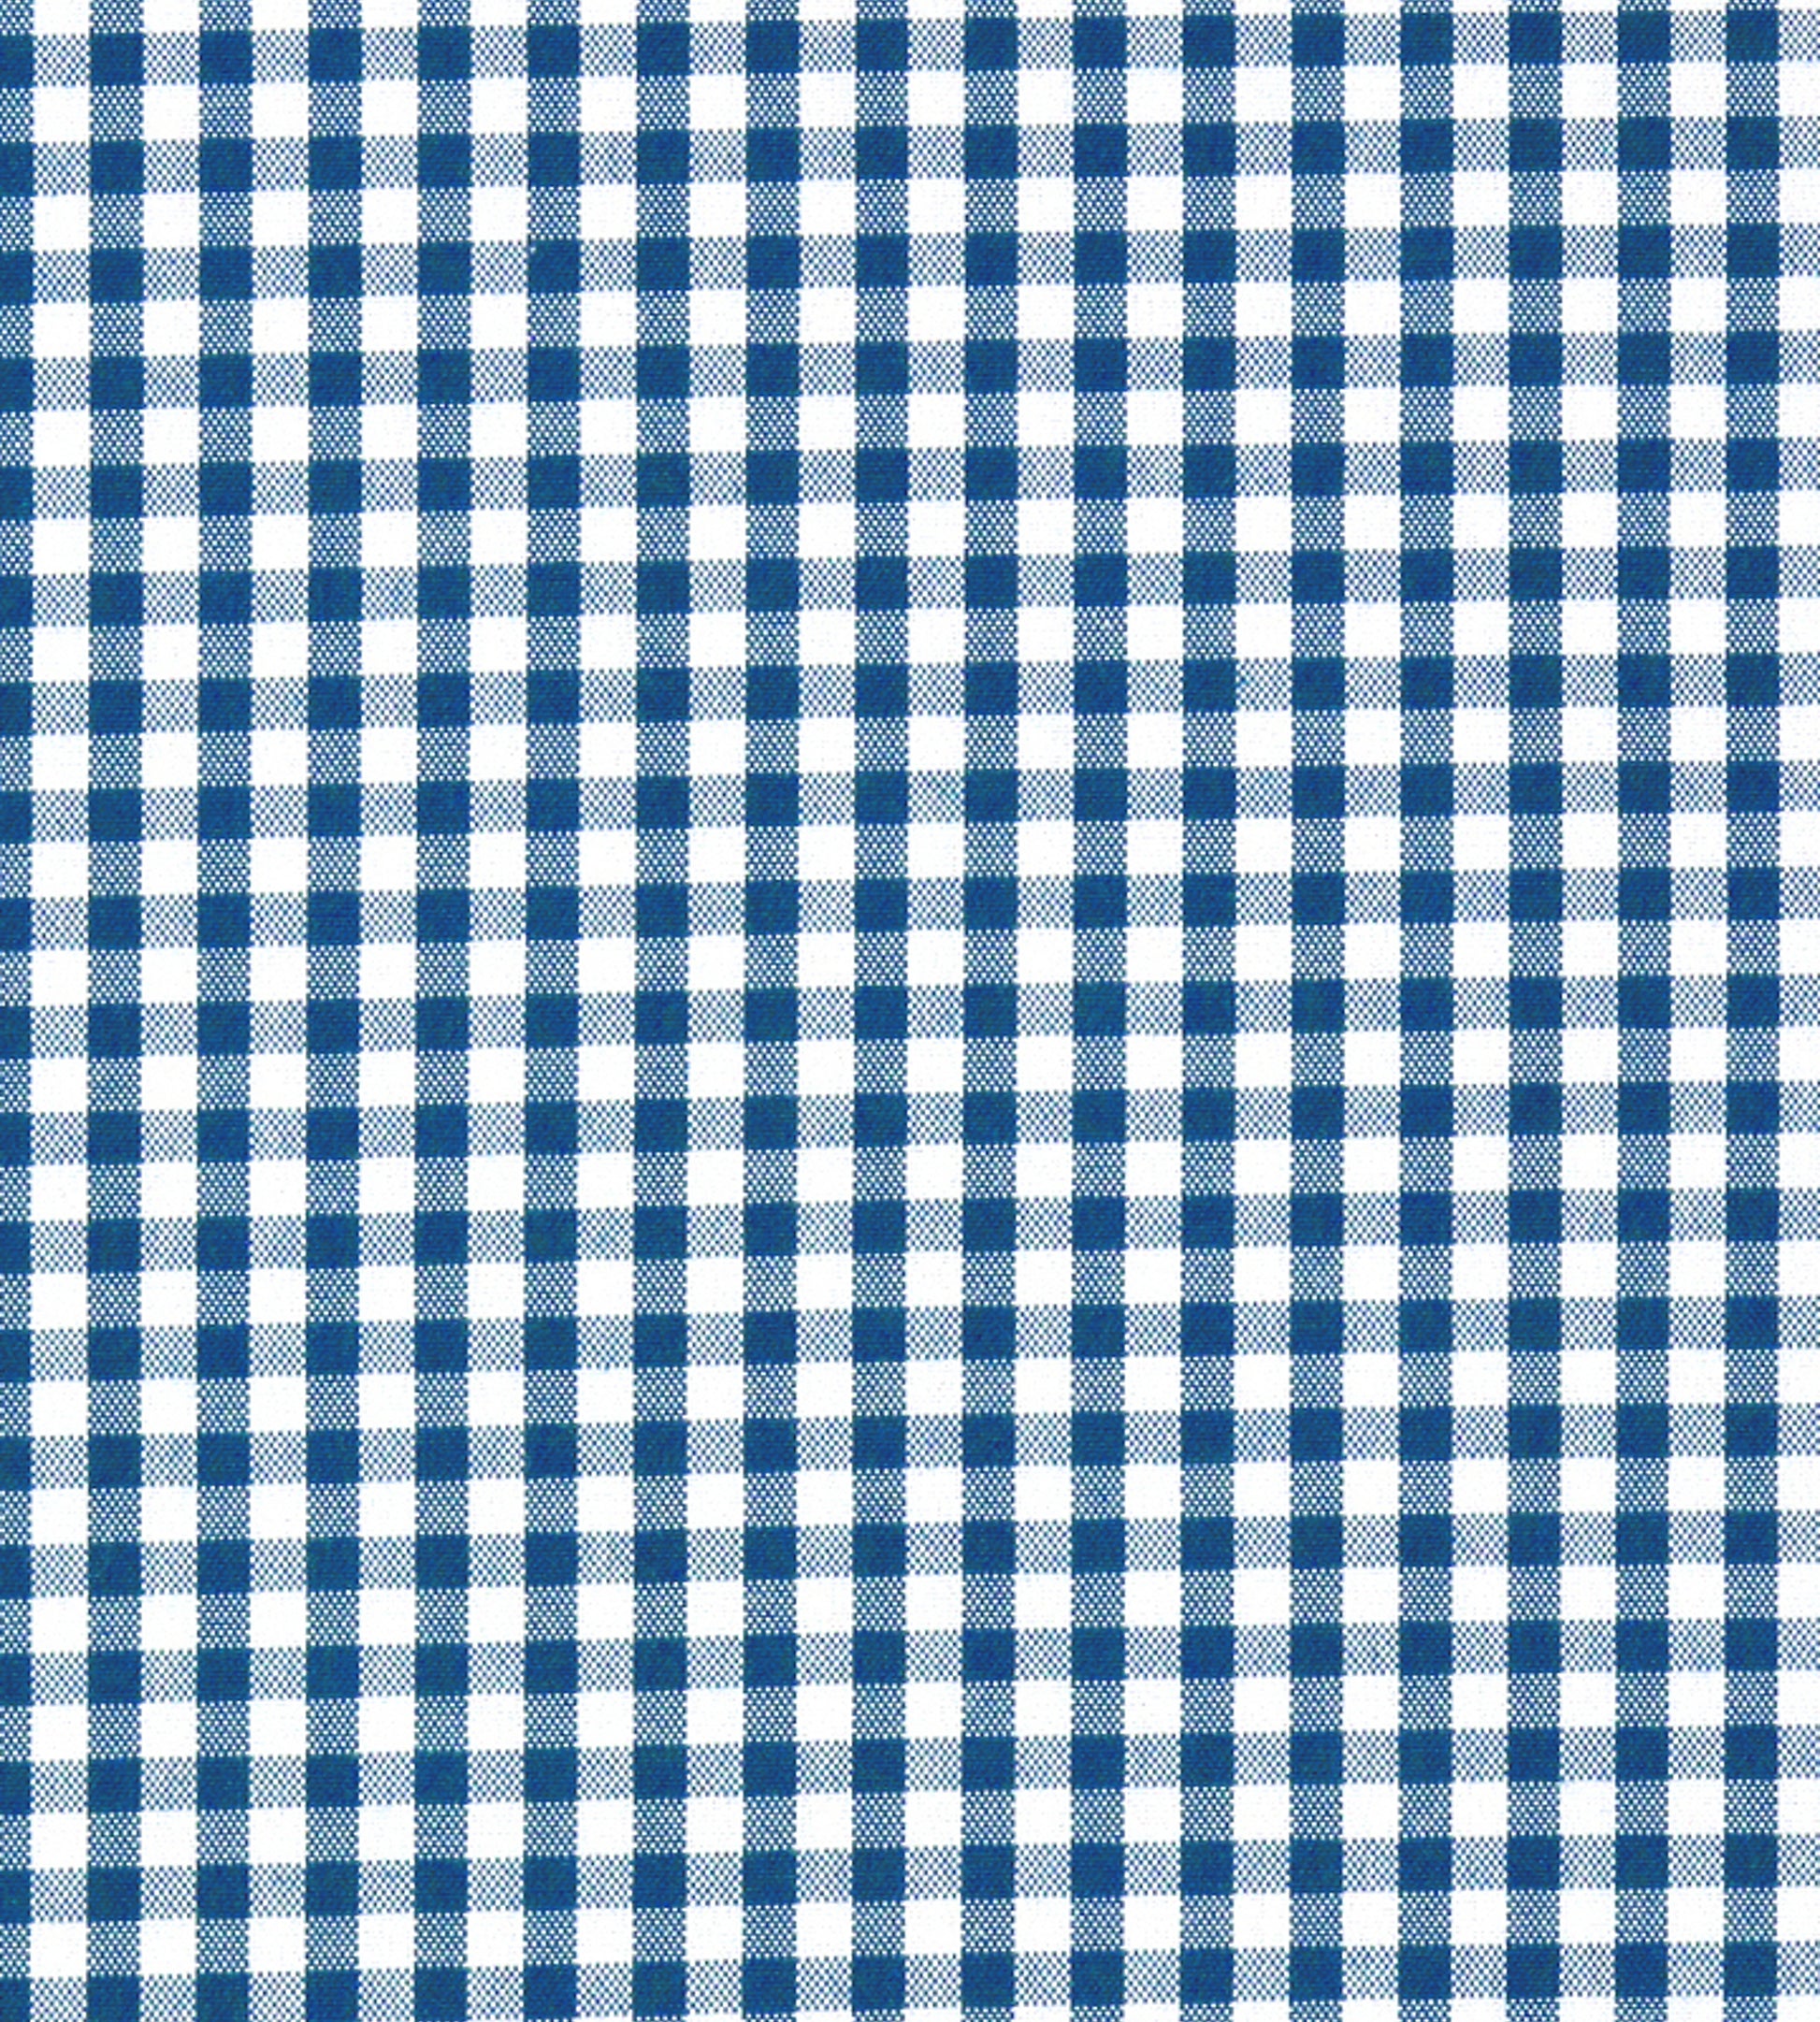 Purchase Old World Weavers Fabric Item# F3 00123018, Poker Check Blue 1